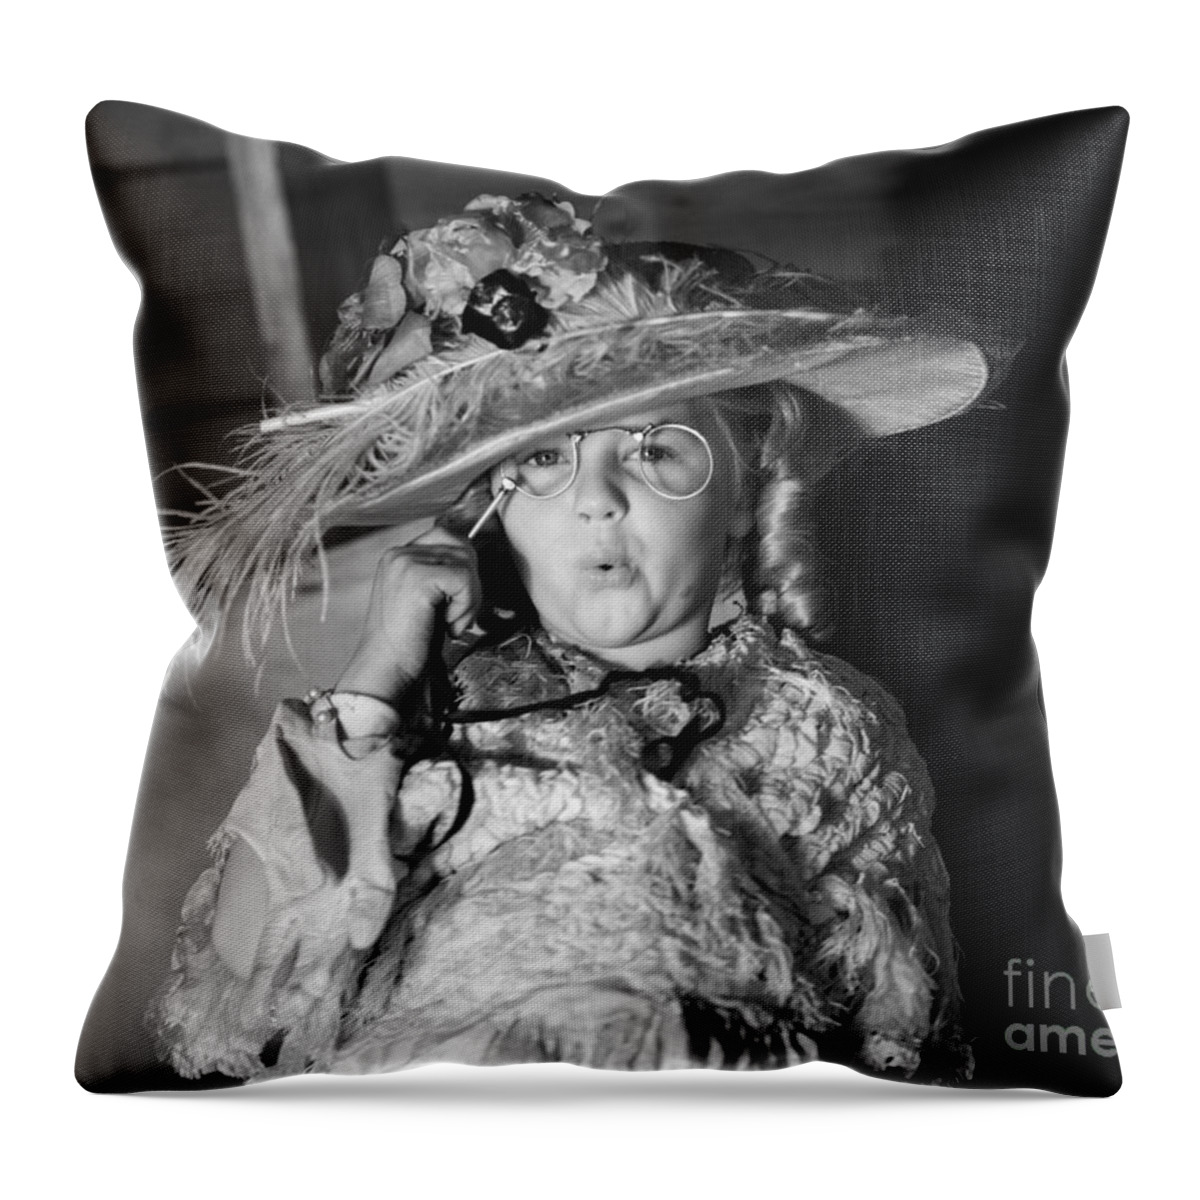 1950s Throw Pillow featuring the photograph Girl Playing Dress-up, C.1950s by H. Armstrong Roberts/ClassicStock